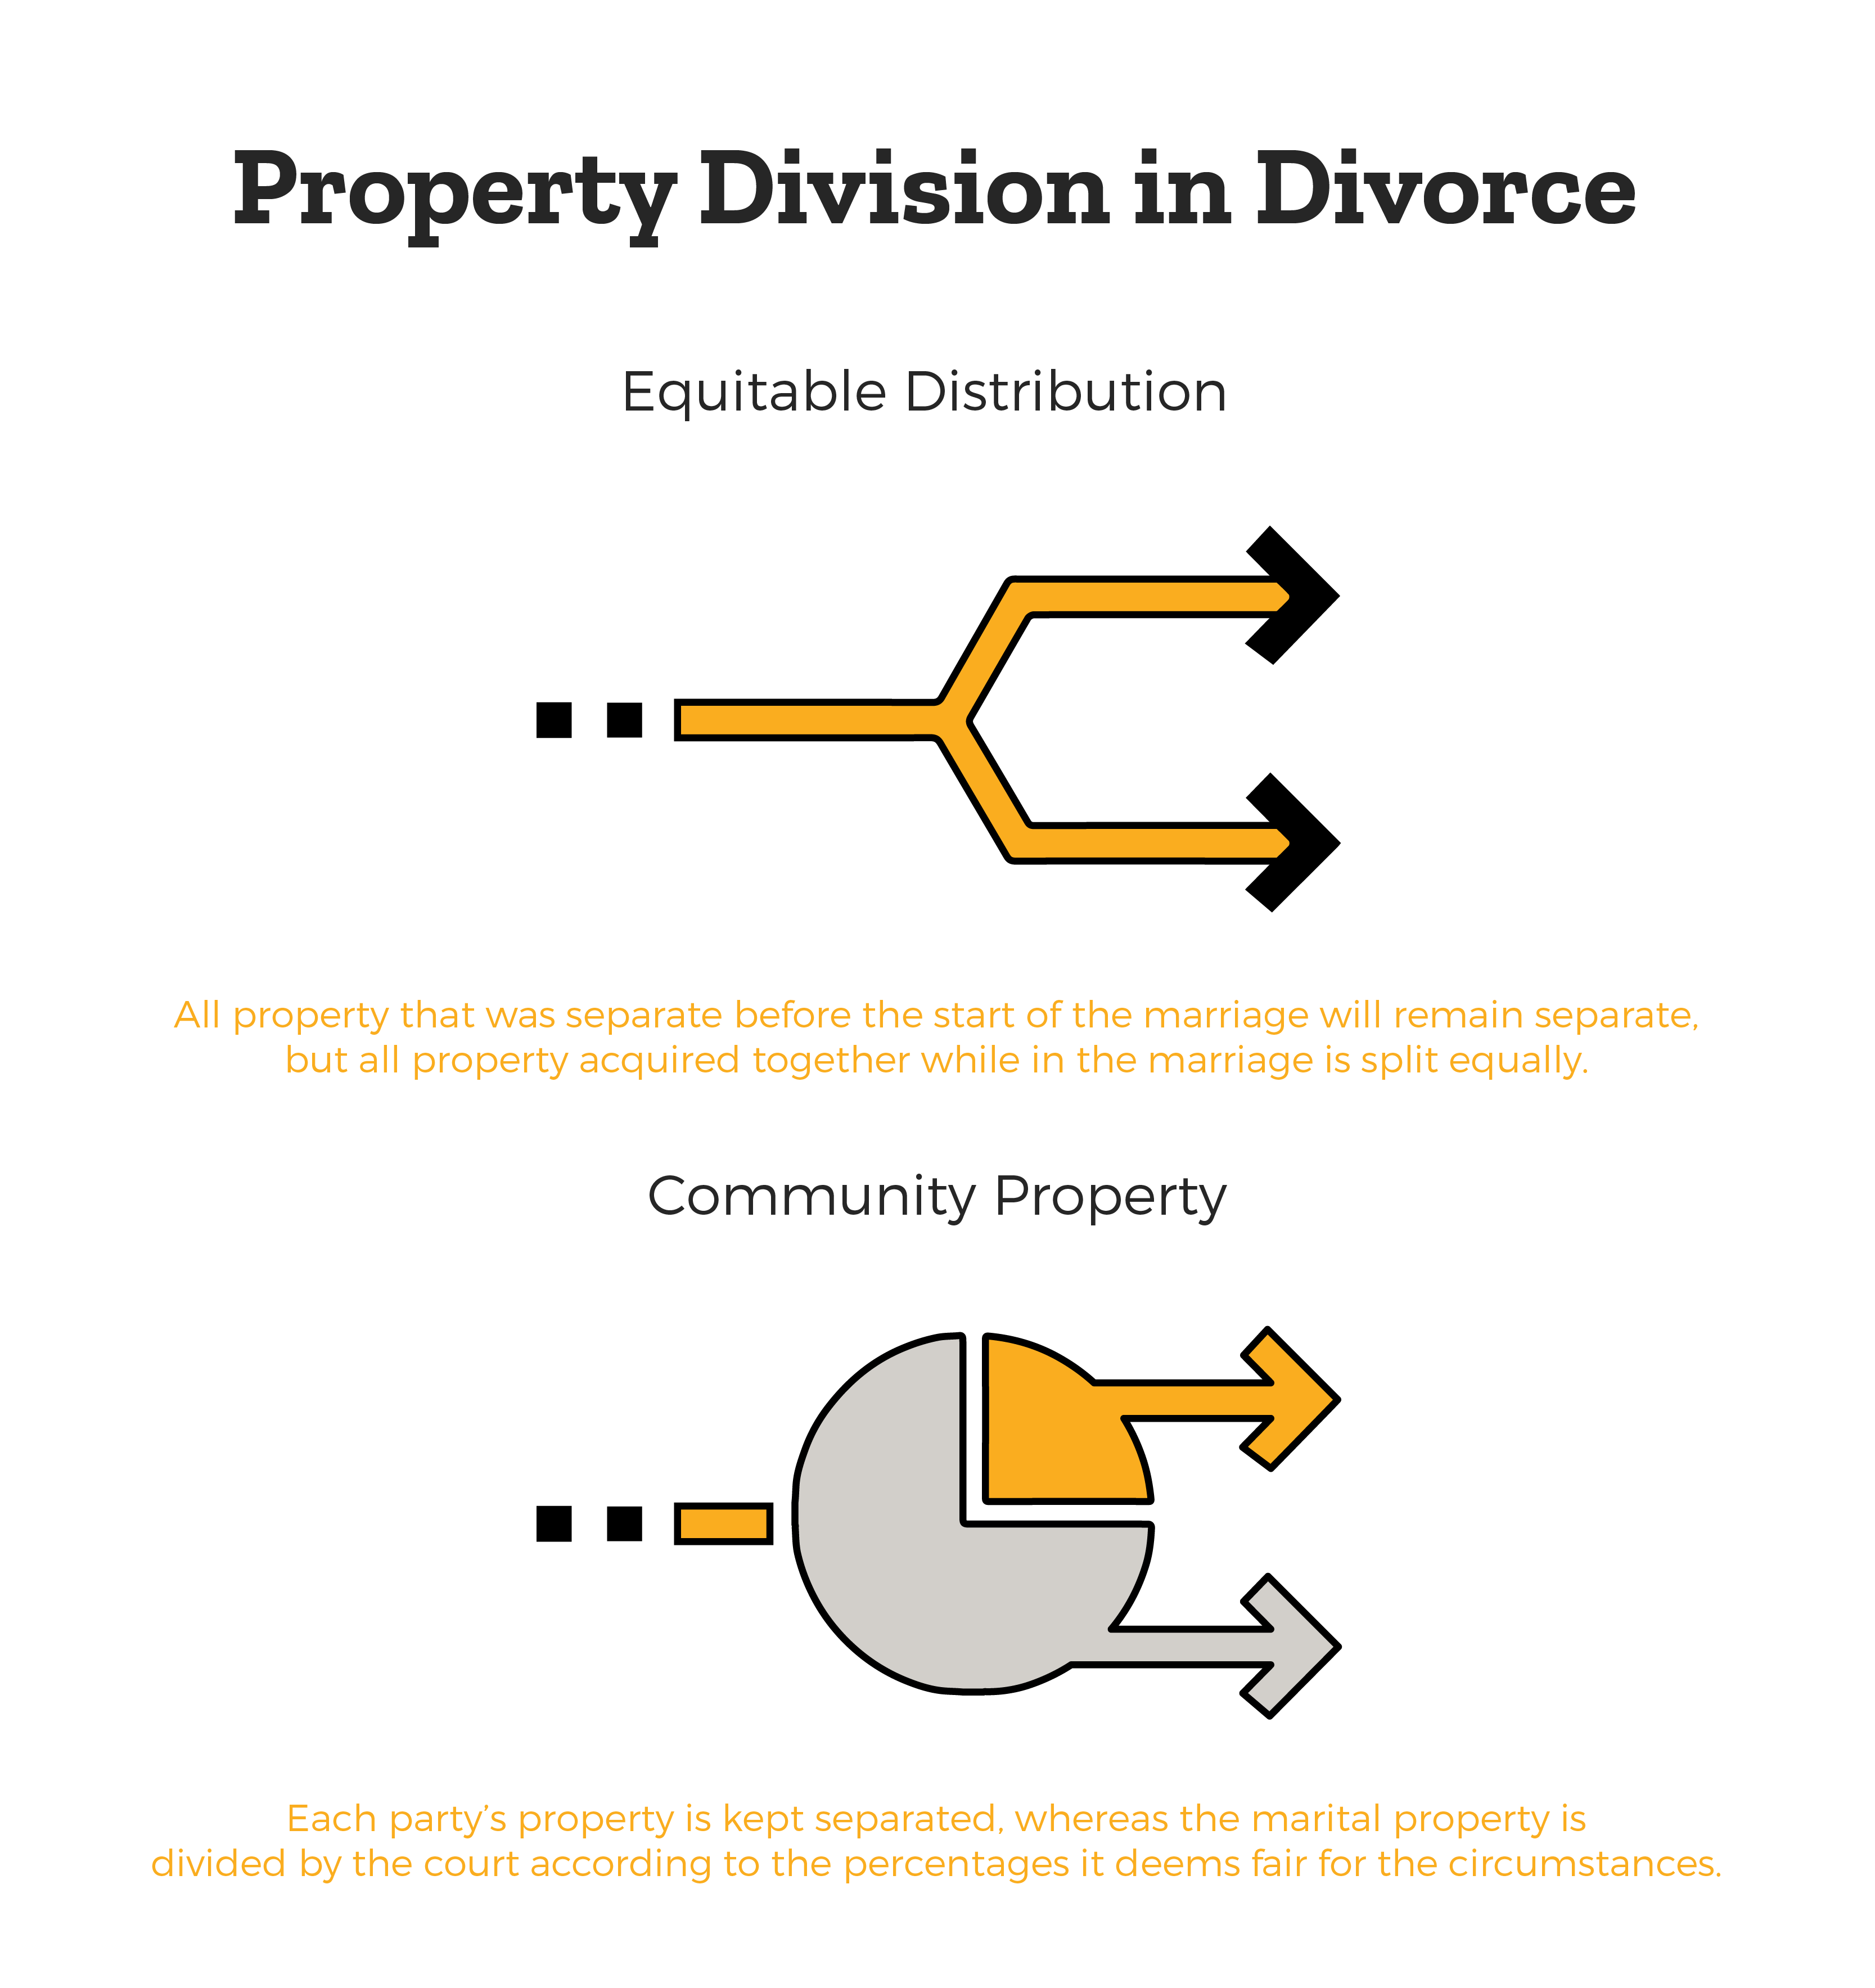 Explanation of Divorce Property Division - Equitable Distribution is when all property that was separate before the start of the marriage will remain separate , but all property acquired together while in the marriage is split equally. Community Property is when each party's property is kept separated, whereas the marital property is divided by the court according to the percentage it deems fair for the circumstances.